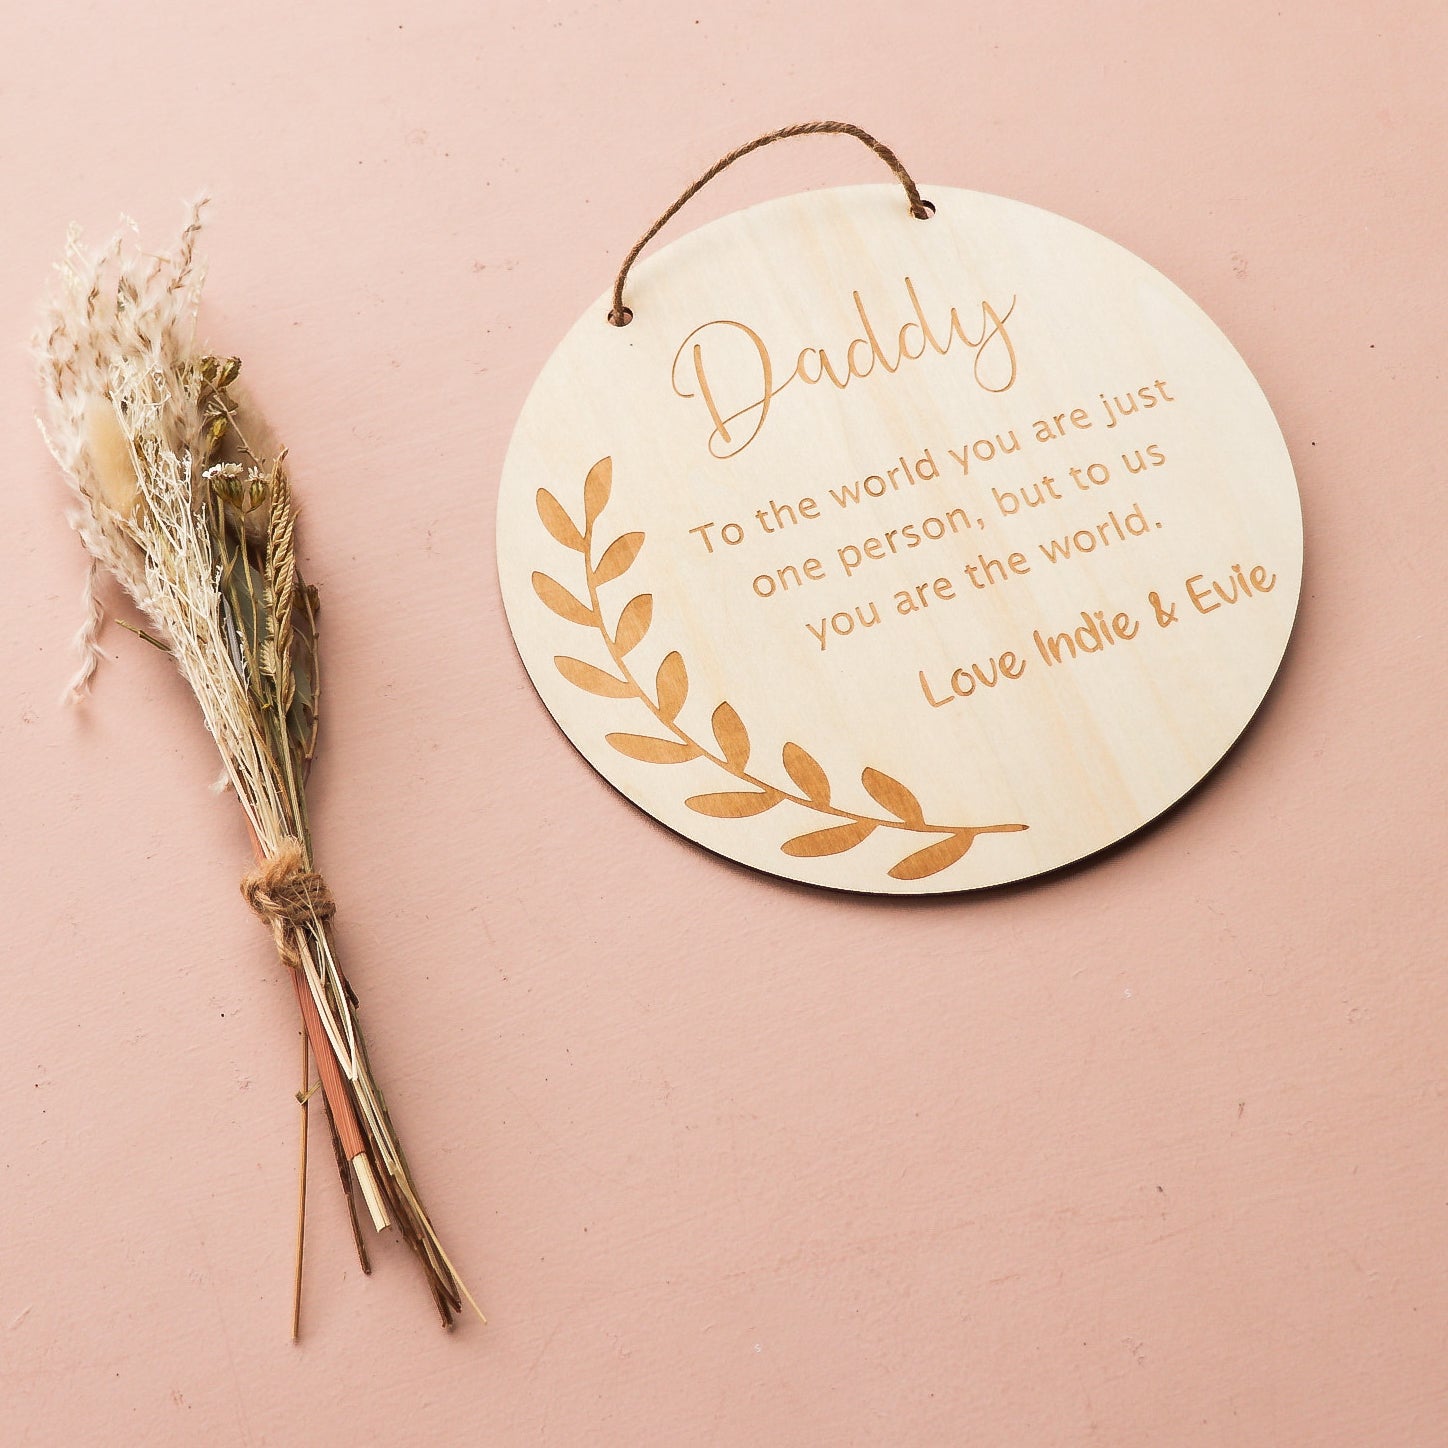 Father's Day Plaque - To the world you are just one person...